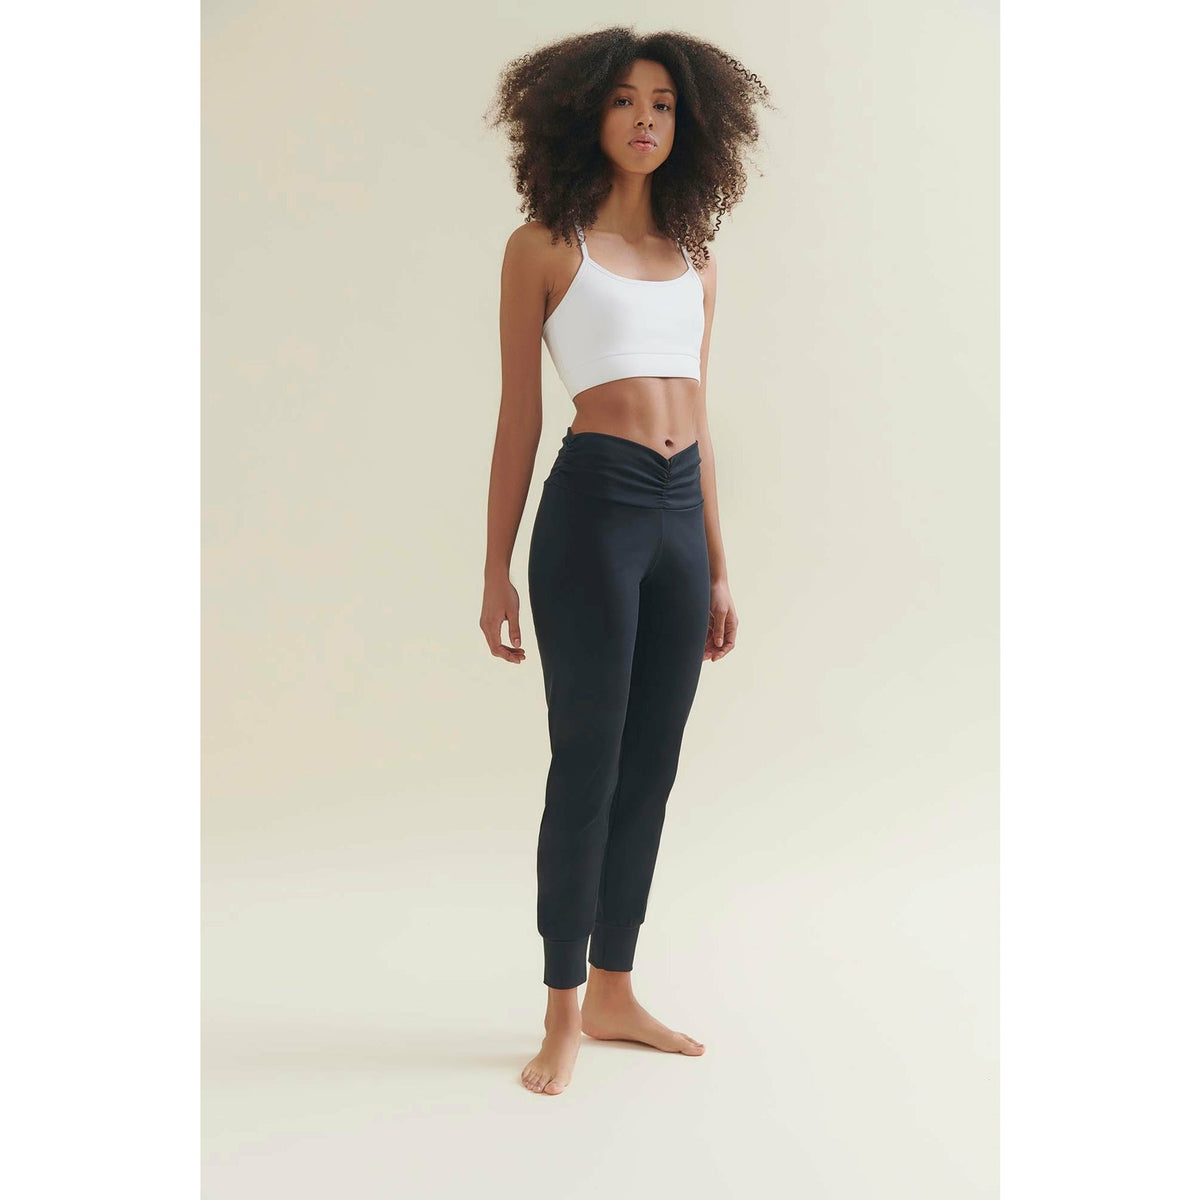 womens black yoga pants by wellicious